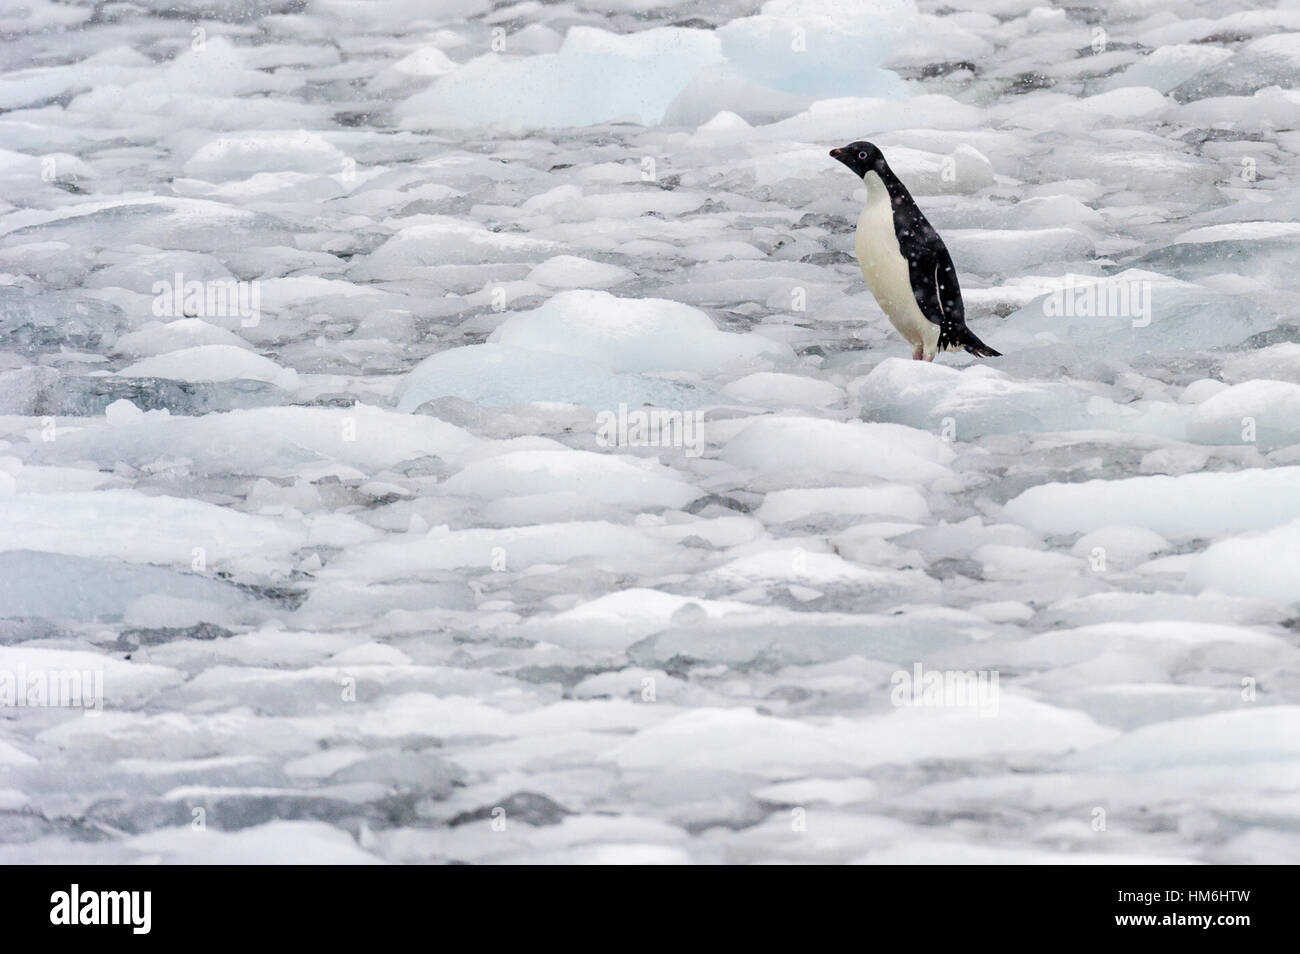 An Adelie Penguin standing on icebergs broken from a nearby glacier. Stock Photo